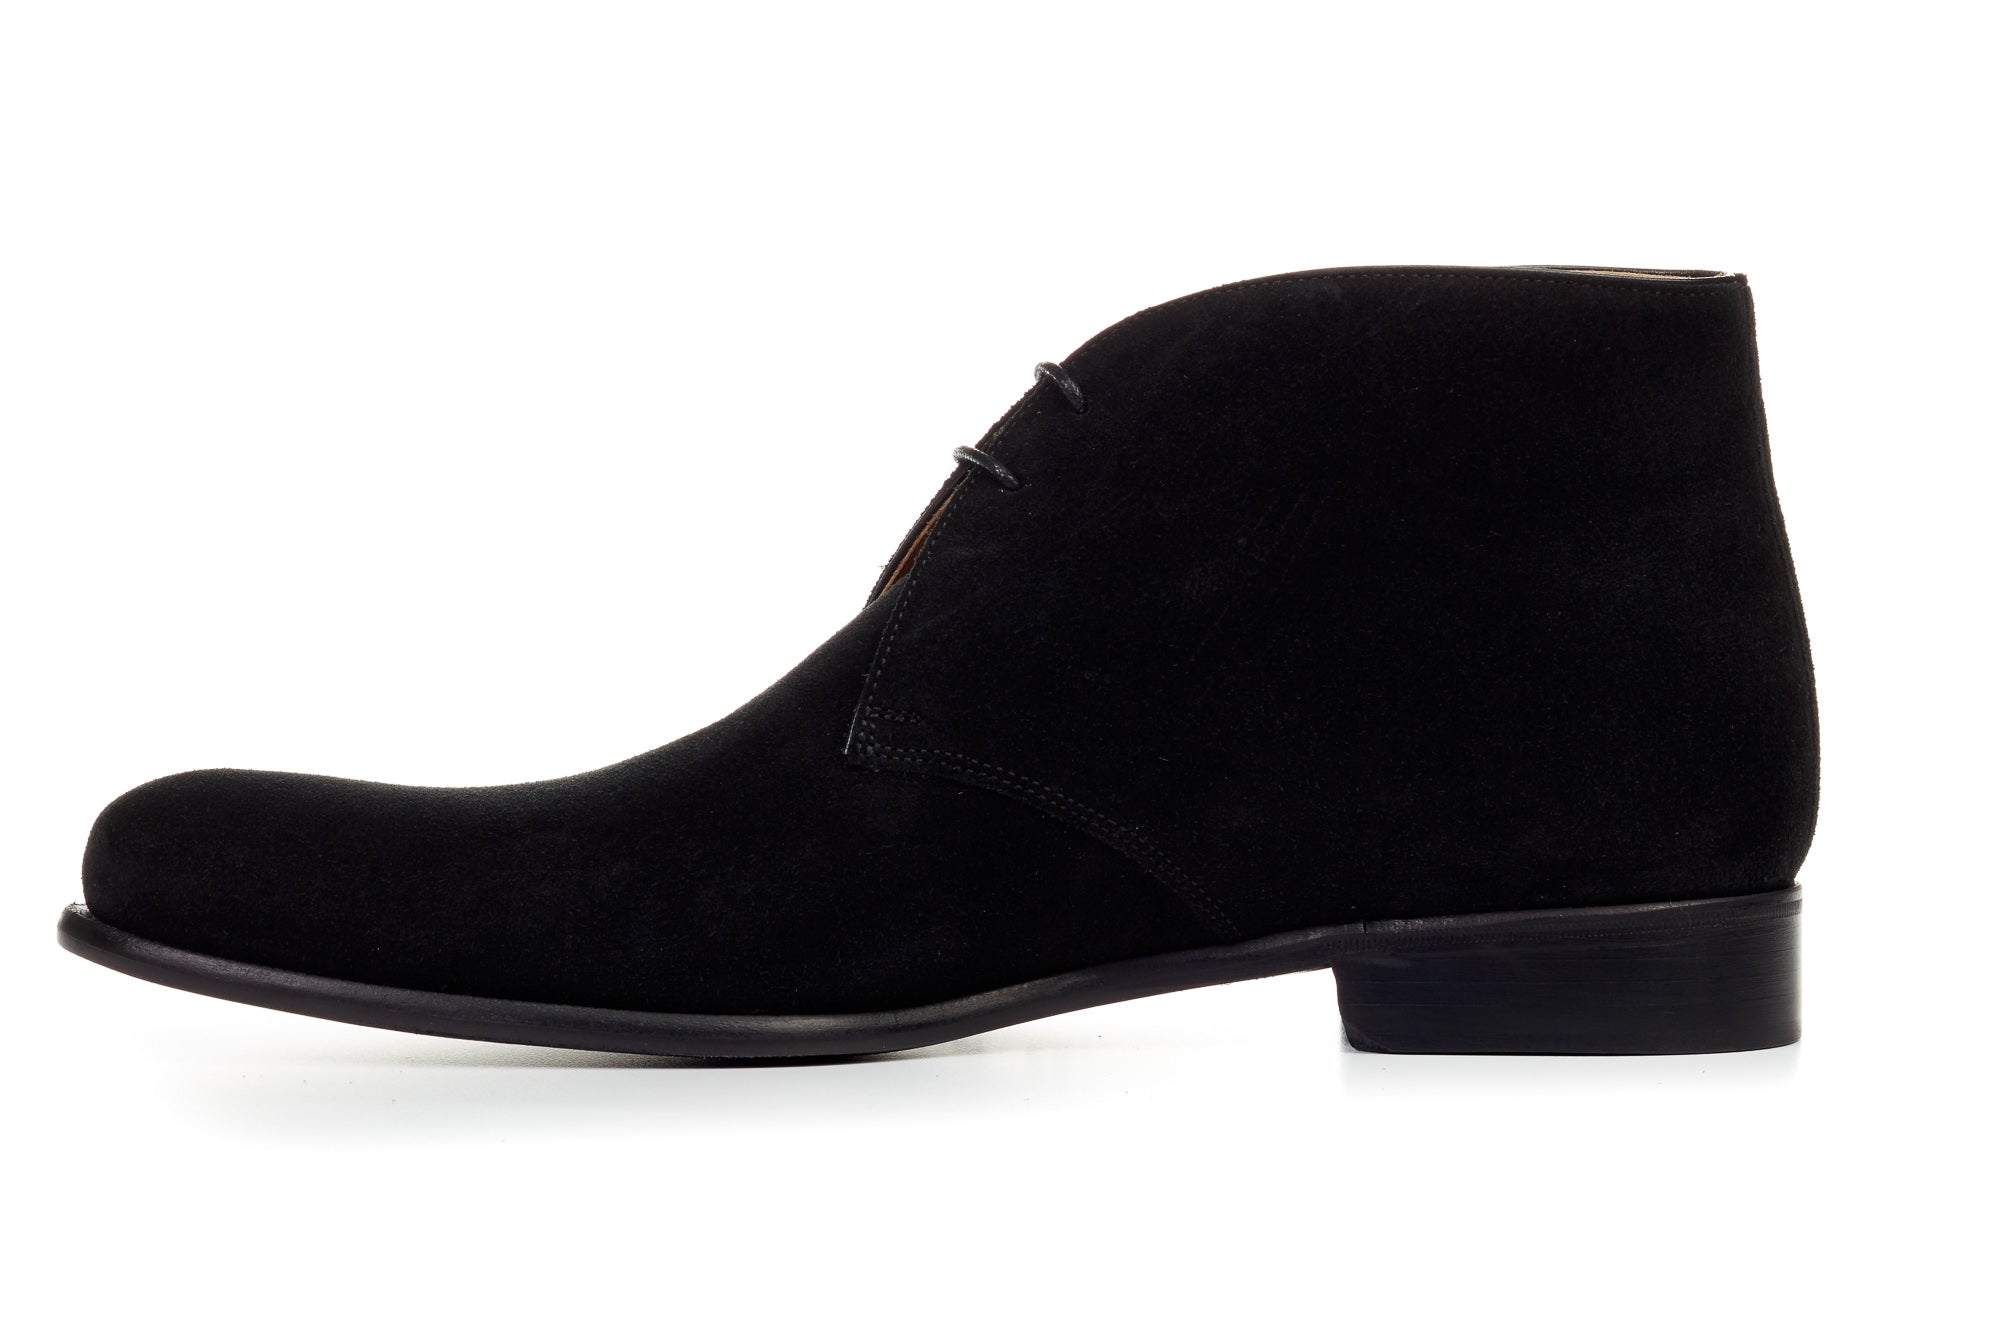 The Newman Chukka Boot - Nero Suede